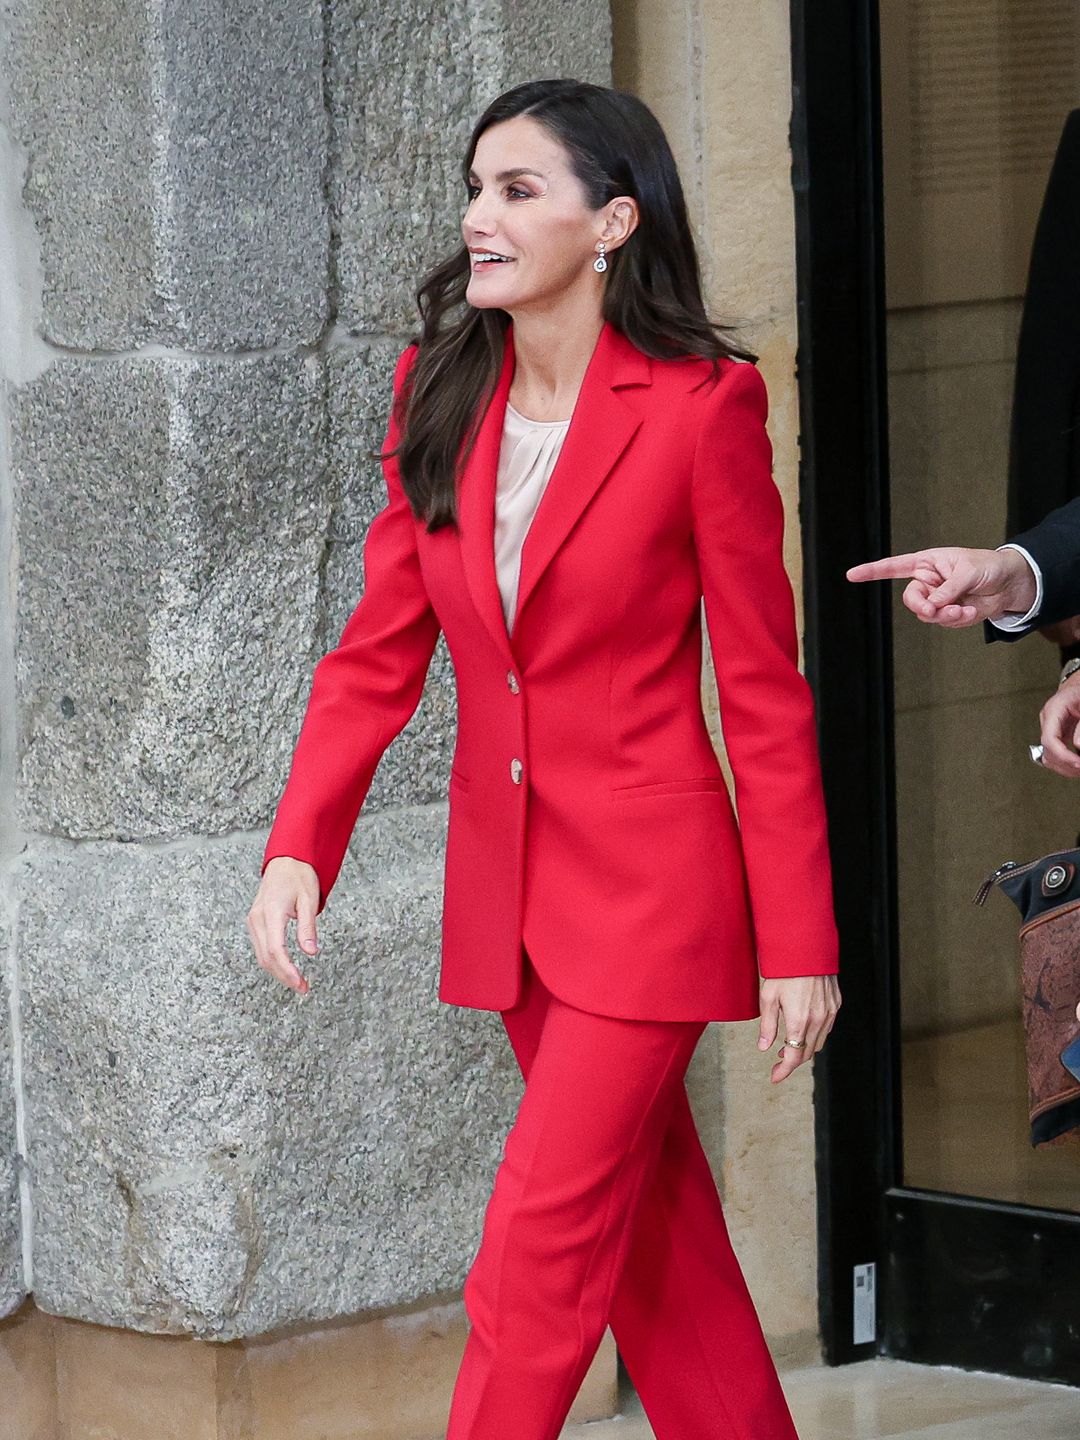 Queen Letizia wears a red suit and nude heels to attend the International Journalism Awards in Spain